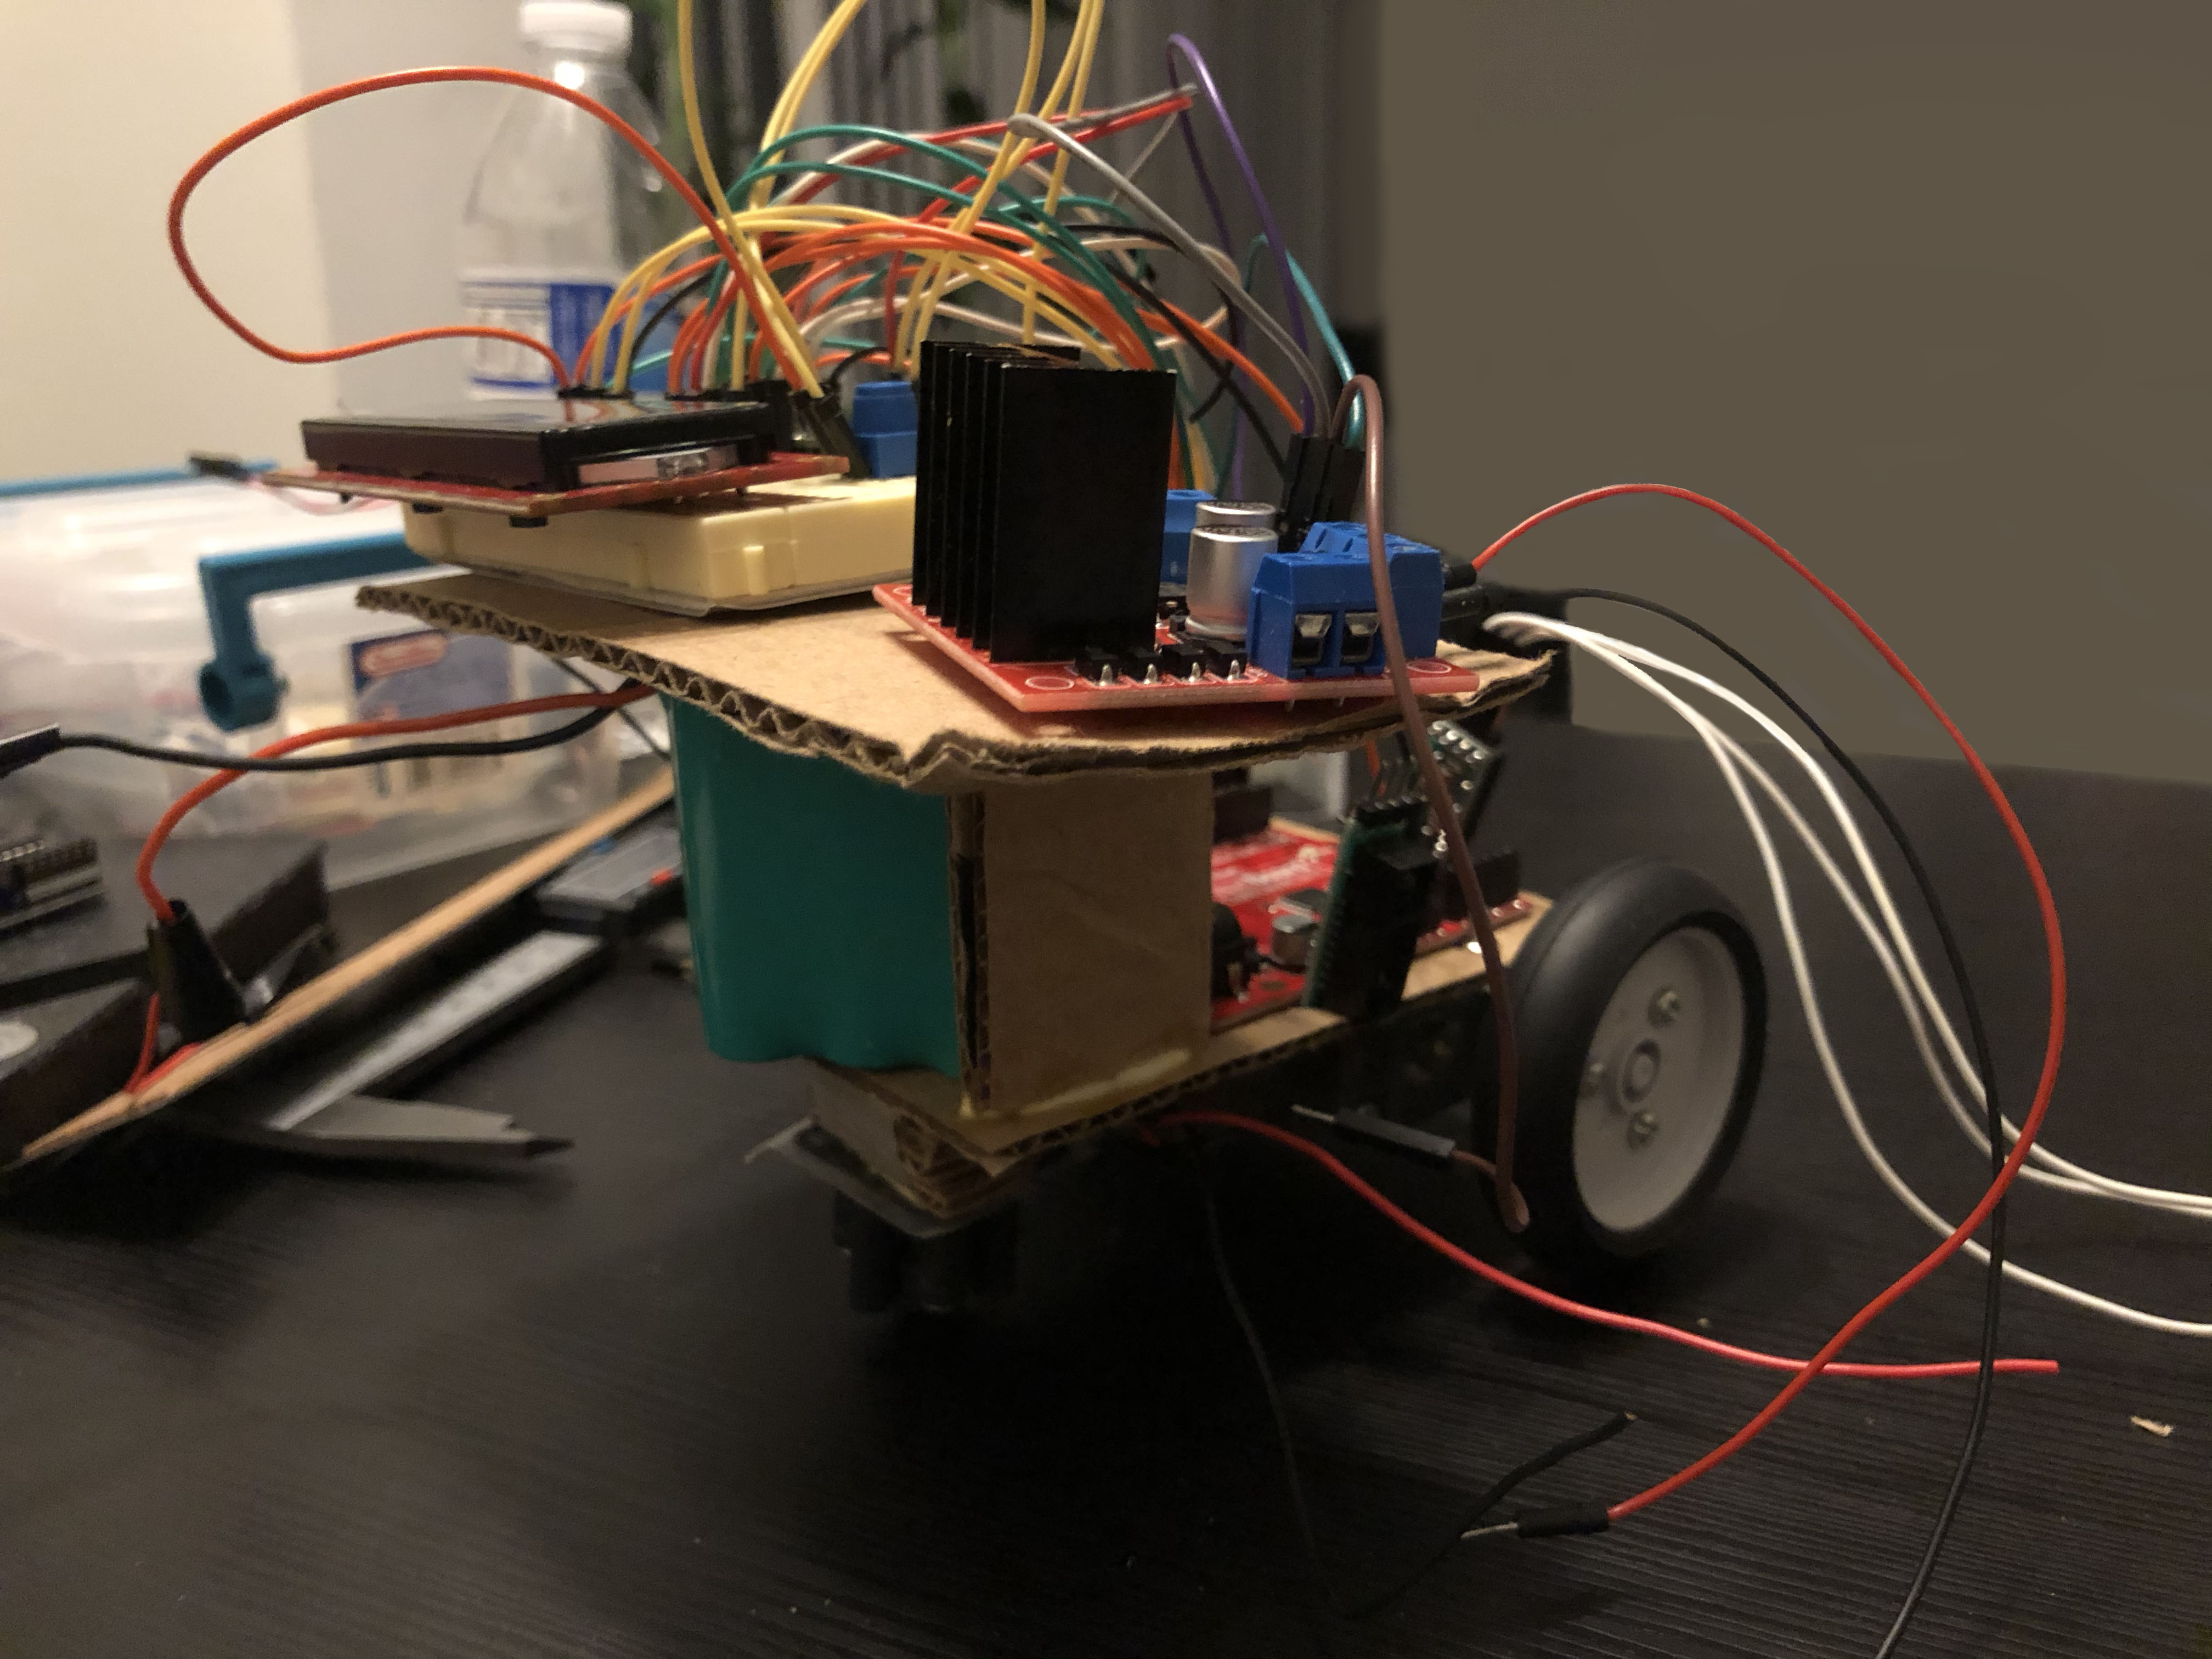 Prototyping a Chassis with Cardboard